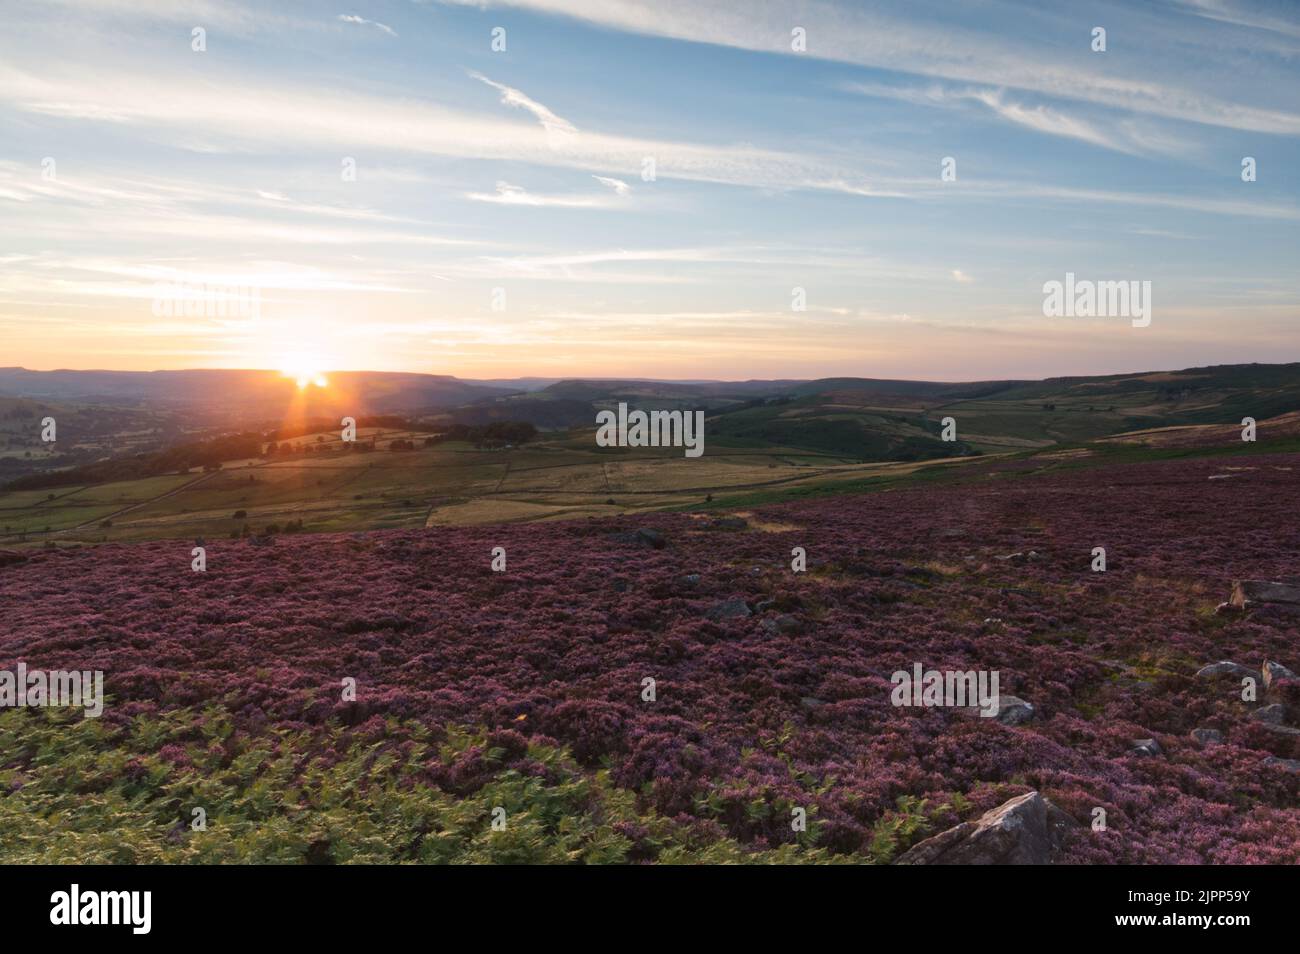 Looking out over pink heather from Over Owler Tor in the Peak District National Park, England, UK Stock Photo